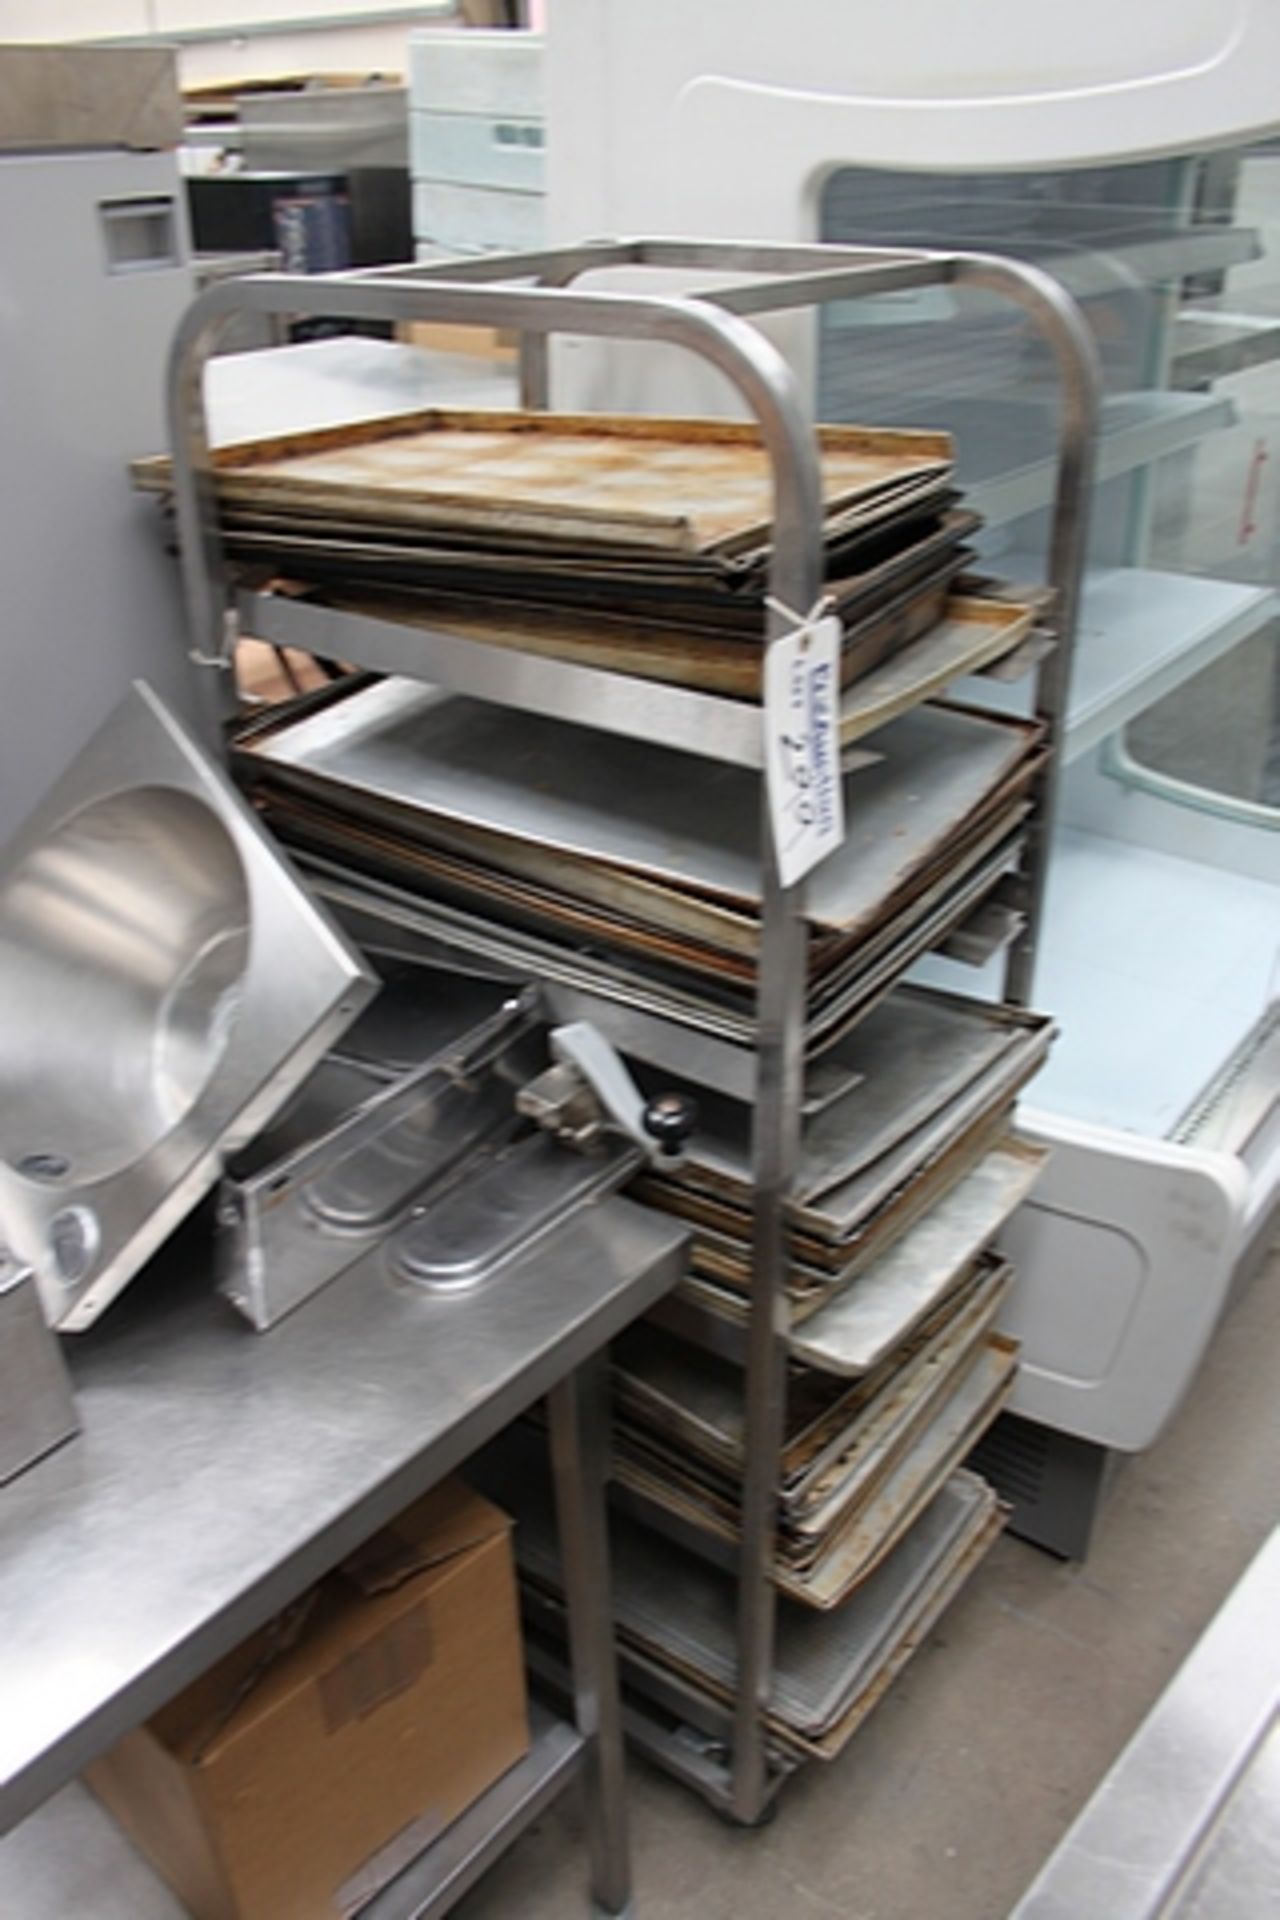 Mobile stainless steel 5 tier rack 460mm x 600mm x 1550mm